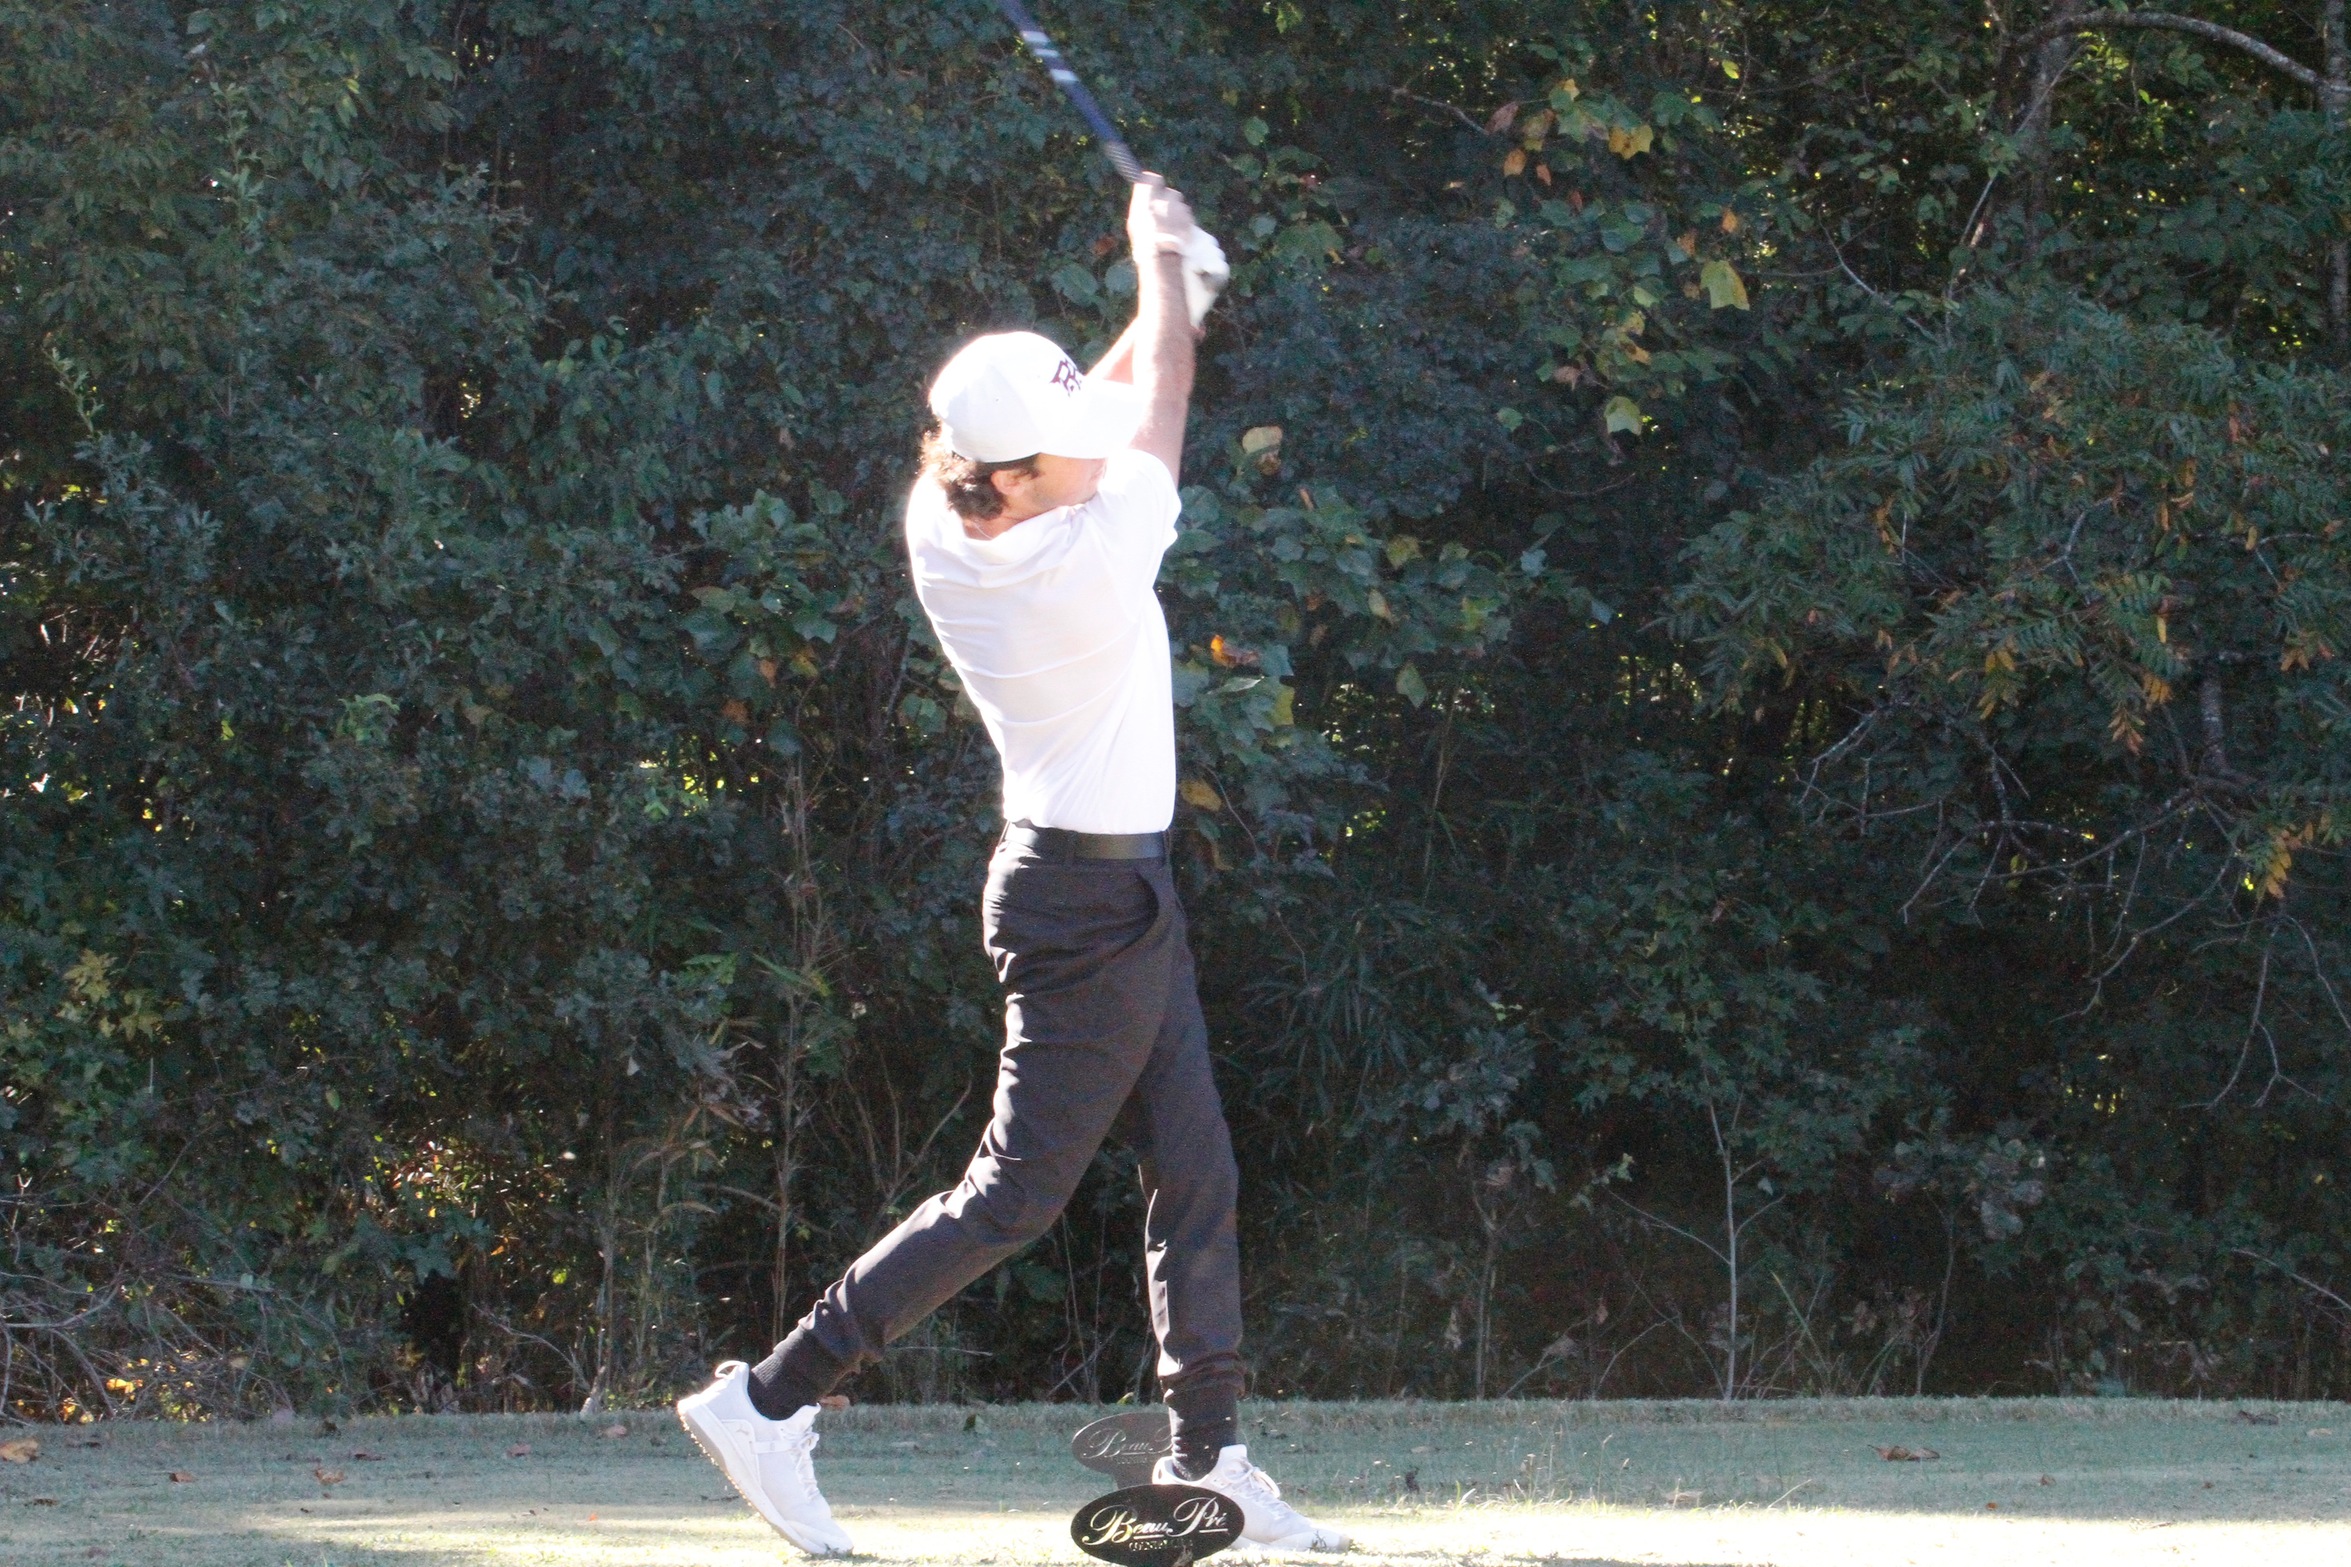 Pearl River golf ties for fifth in Meridian Invitational